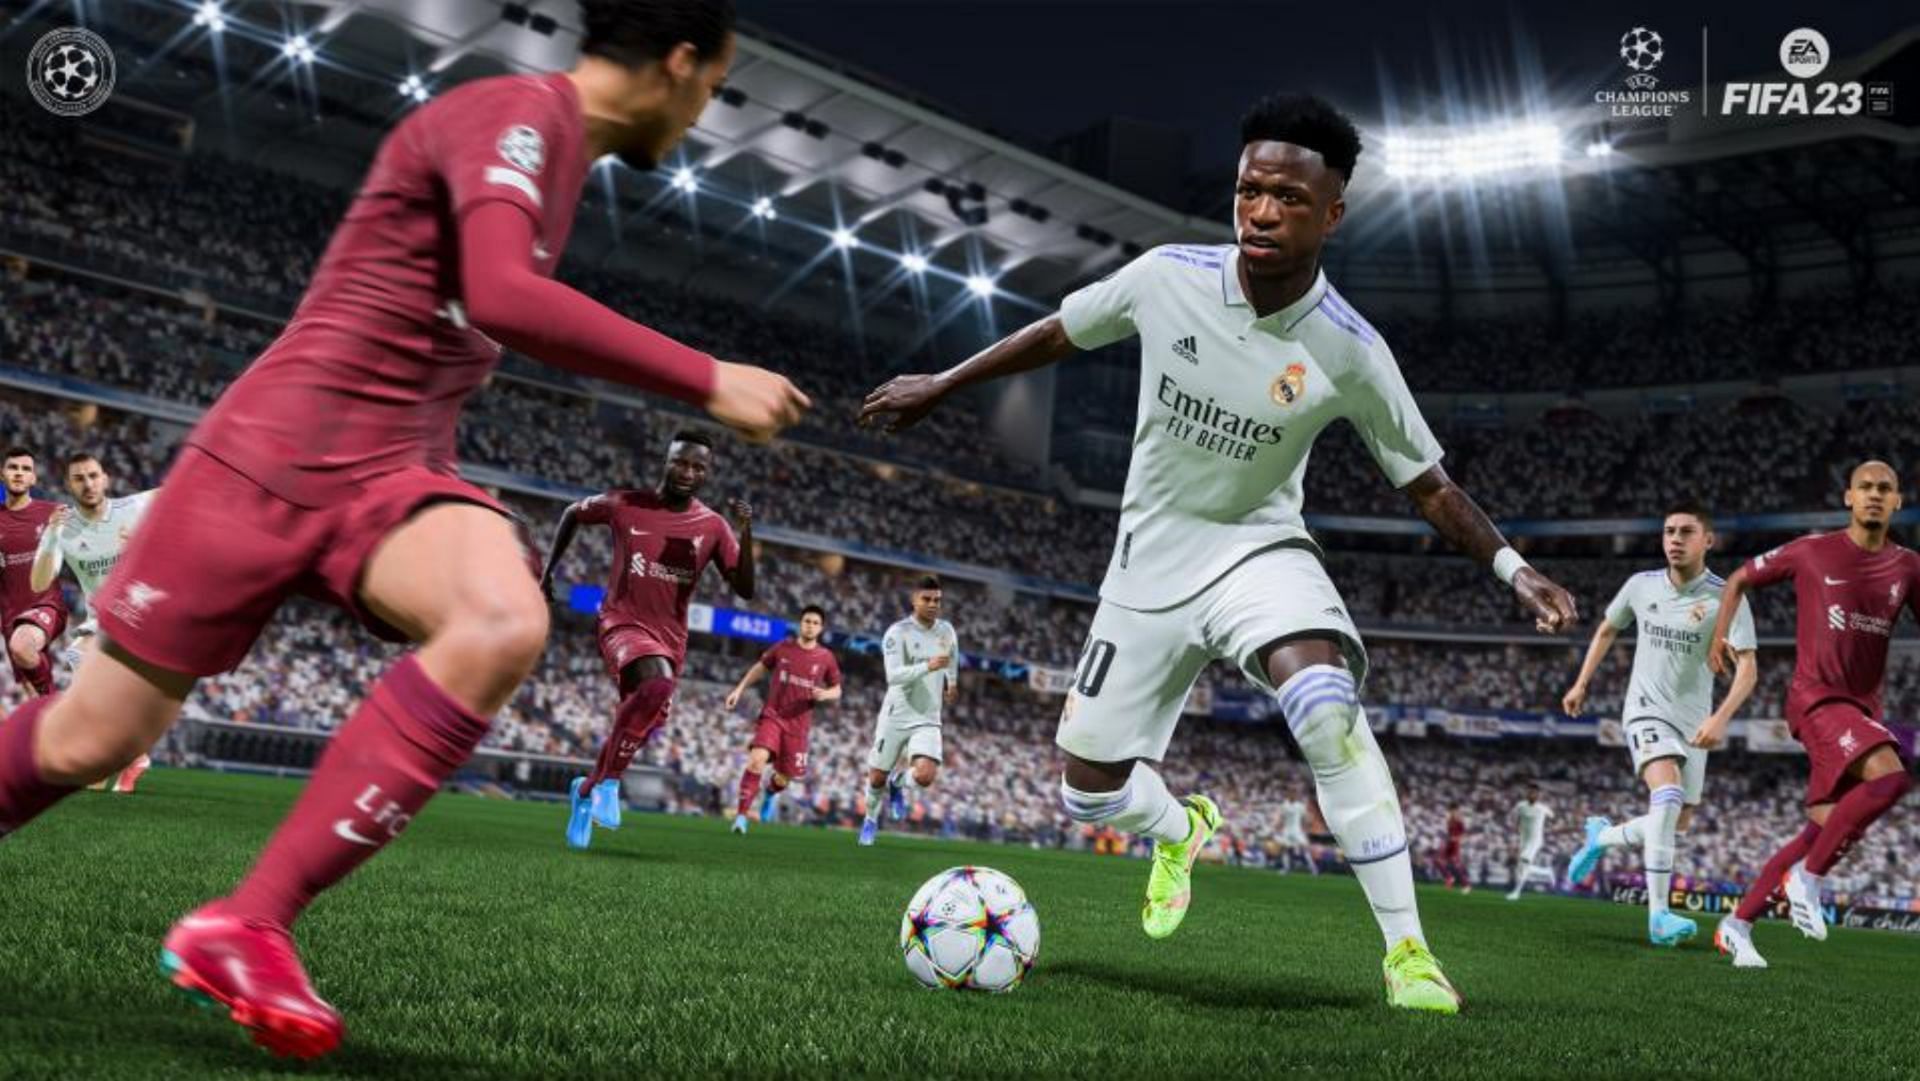 The Real Madrid superstar has received a major boost this time around (Image via EA Sports)